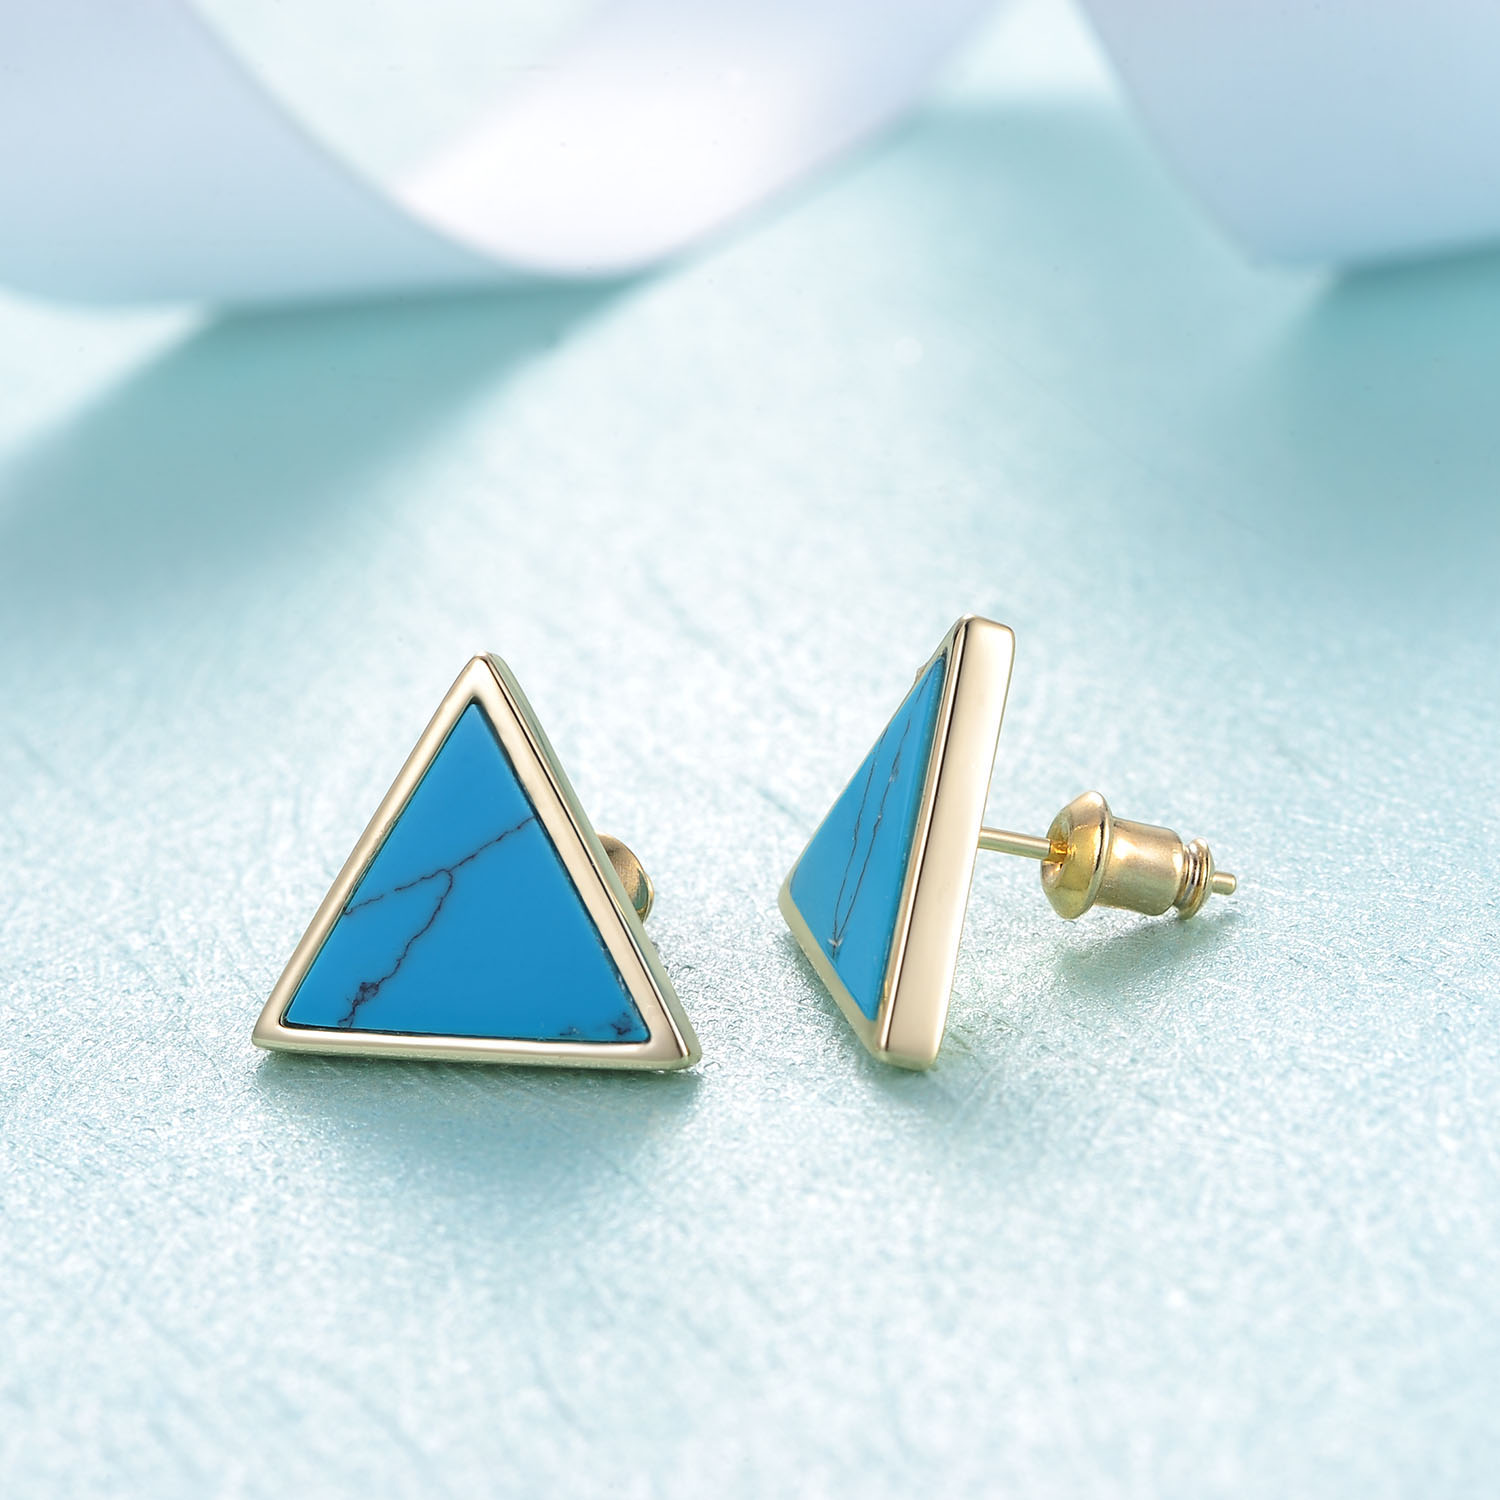 2021 New Style 925 Sterling Sliver Earring For Women Blue Triangular Earrings Stud Fashion Jewelry(图3)